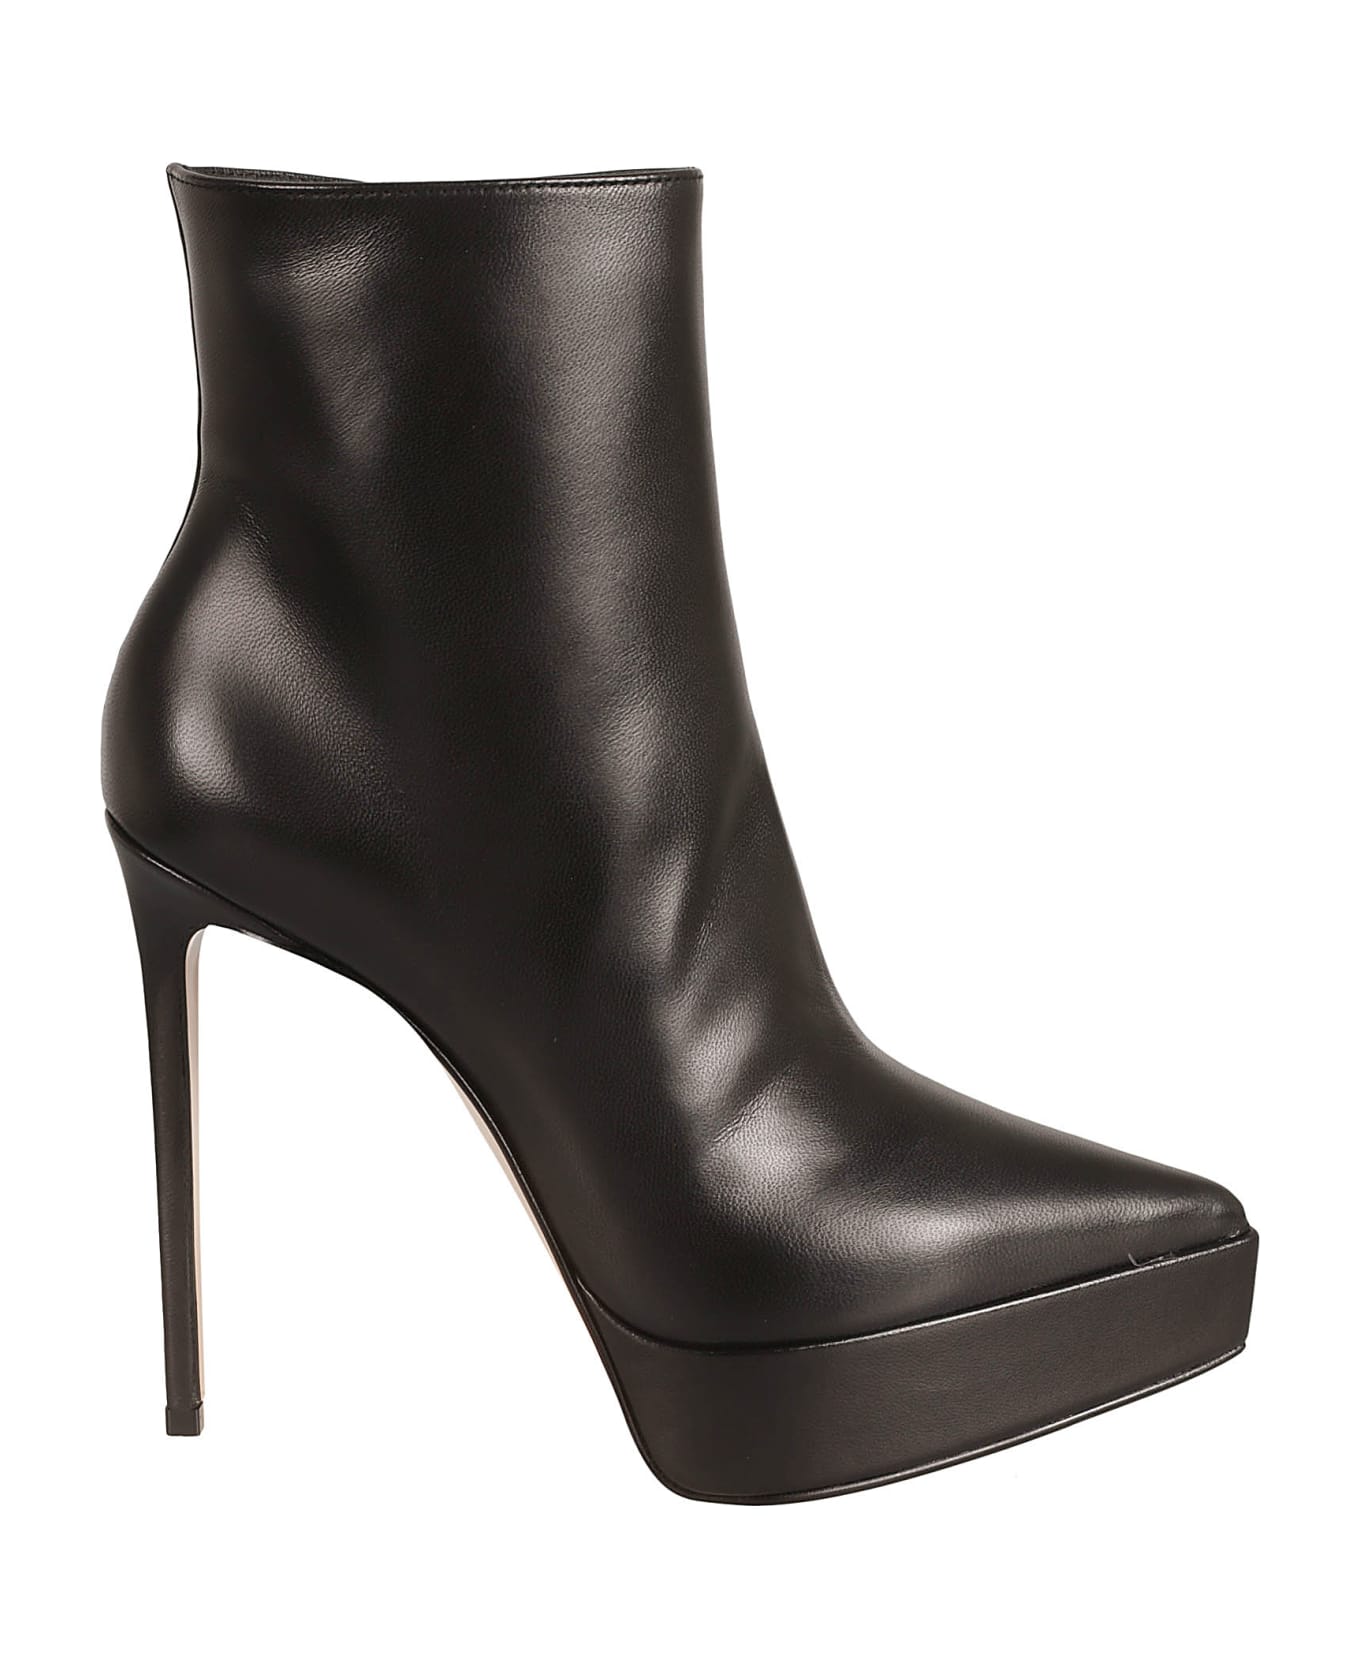 Le Silla Side Zipped Ankle Boots - Black ブーツ